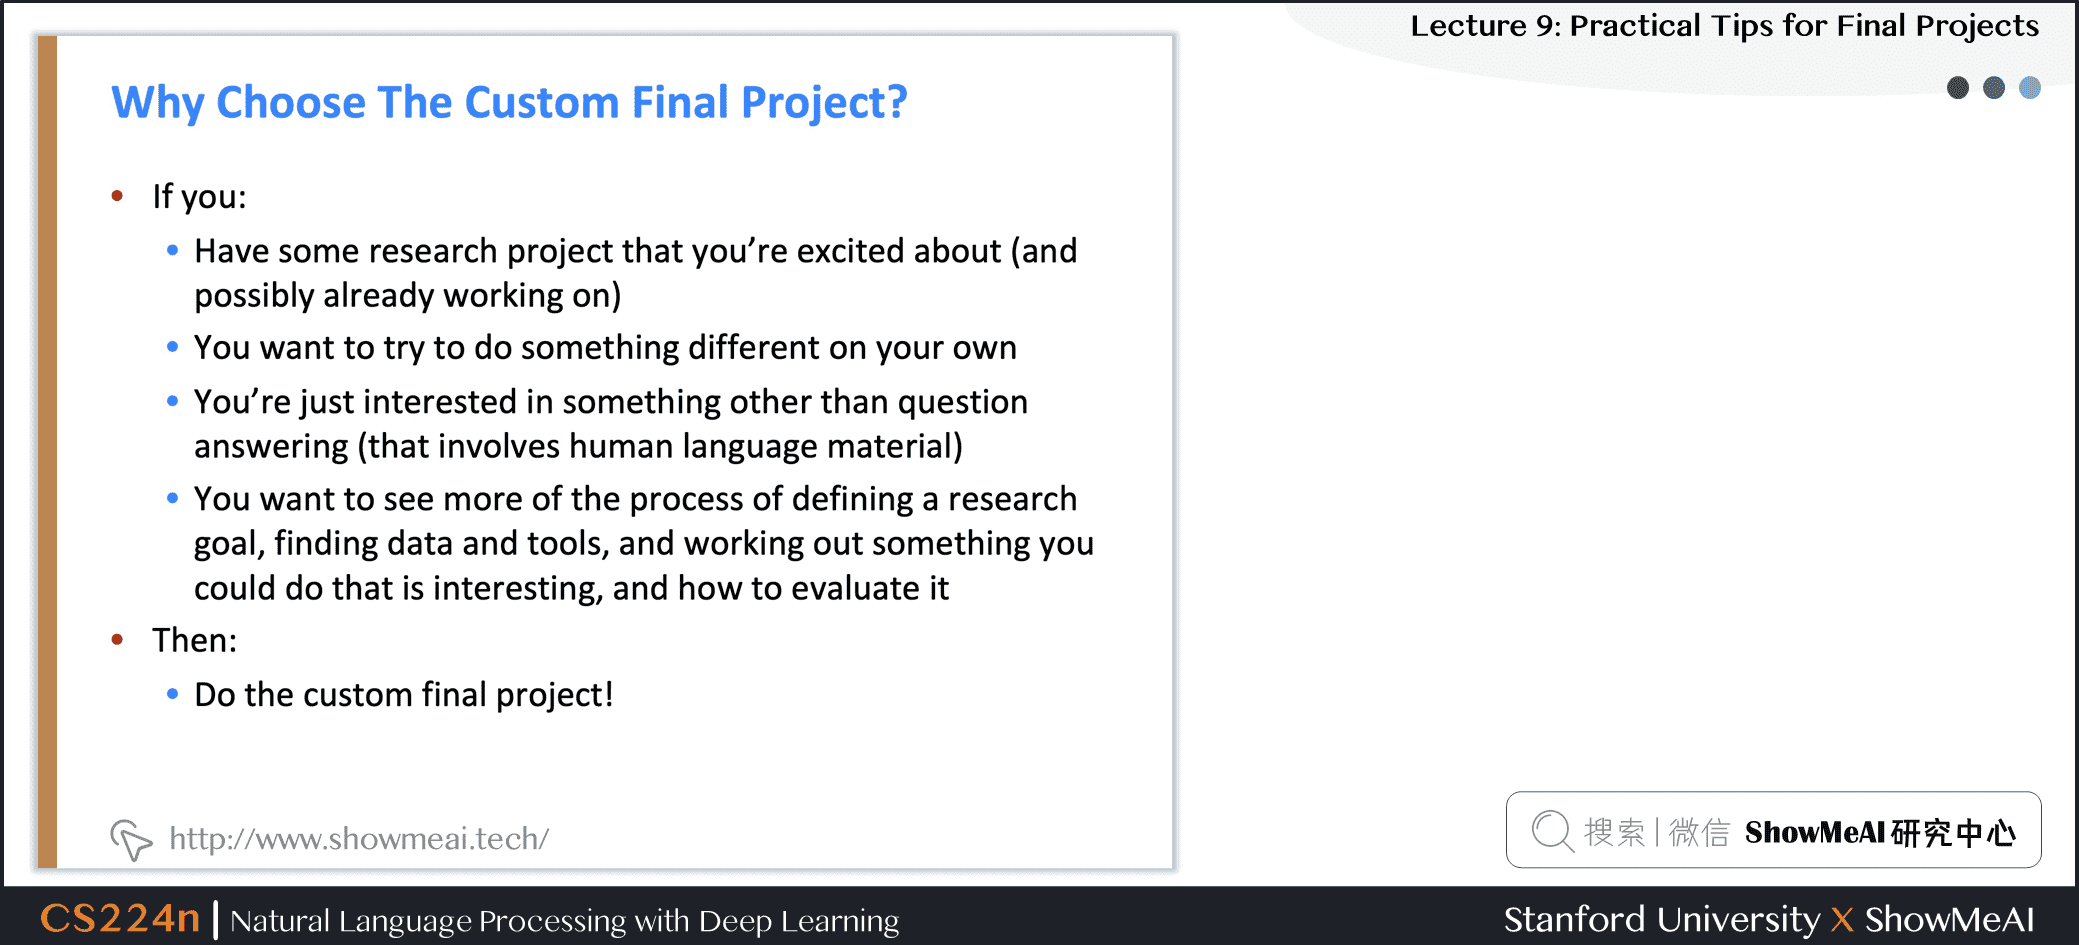 Why Choose The Custom Final Project?